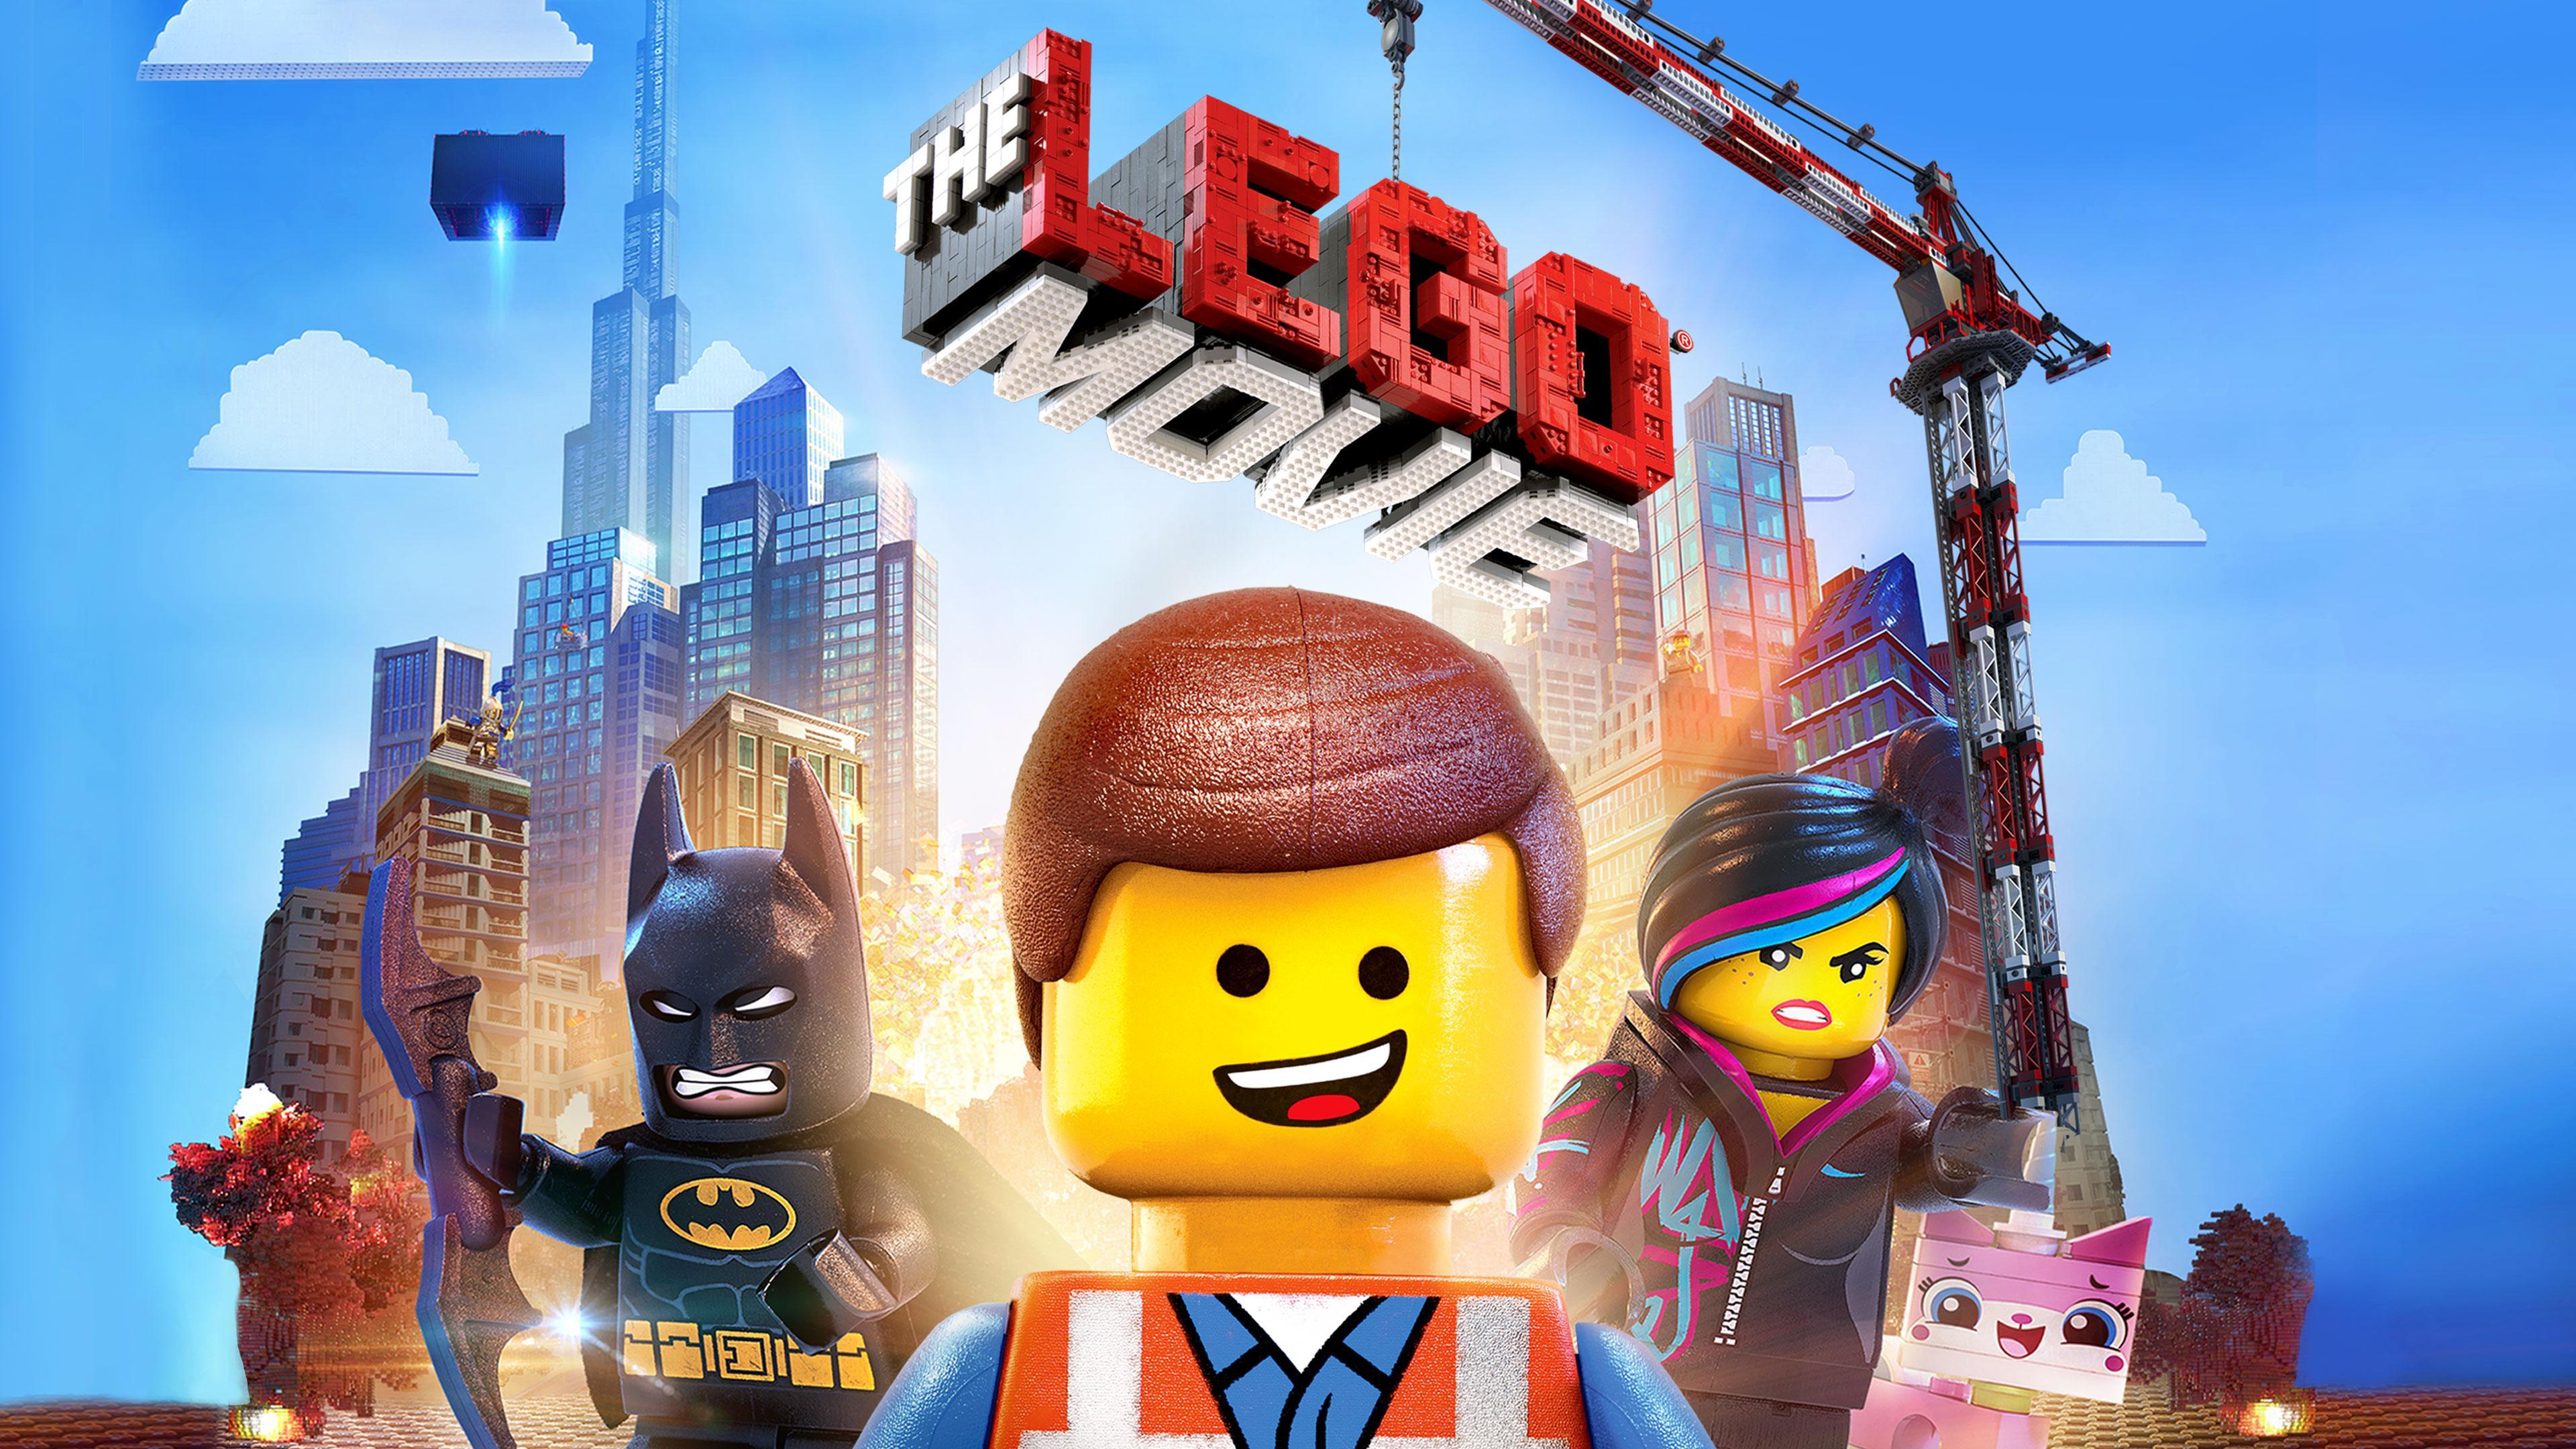 LEGO - Join us LIVE this Sunday with the cast & crew of the LEGO